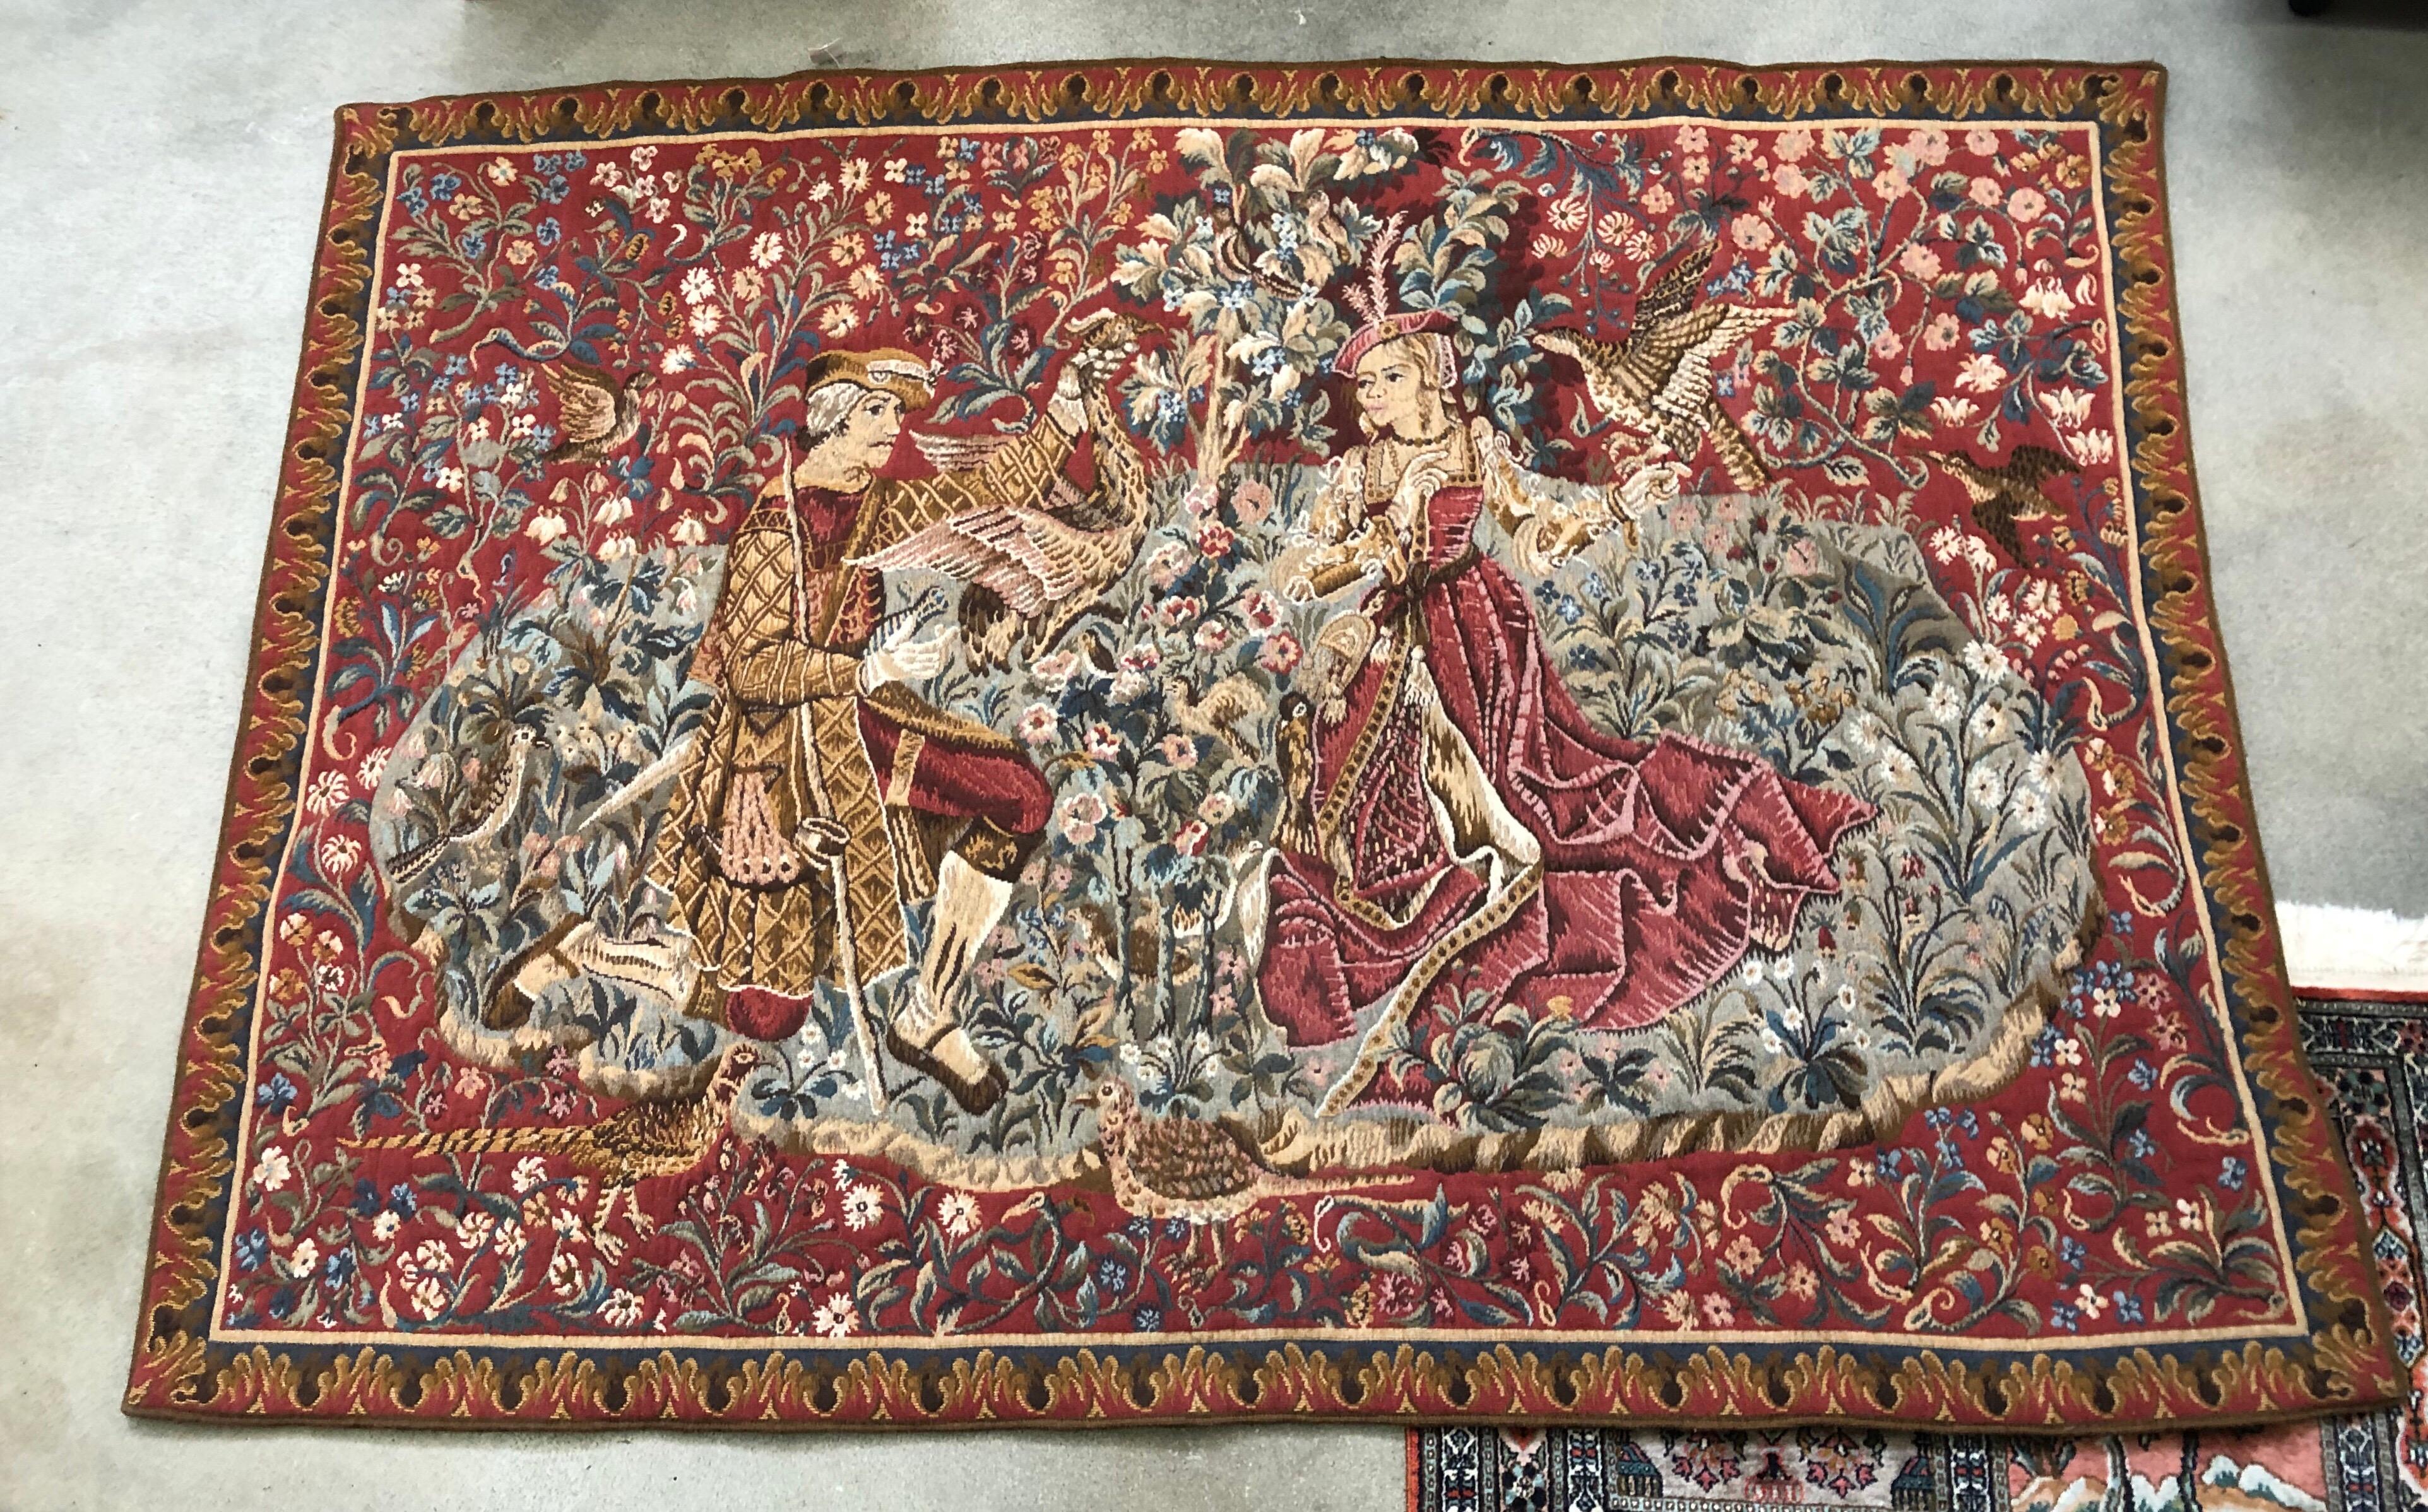 The original:
A lady and her falconer. Franco-Flemish tapestry, late 15th or early 16th century. Height 7 feet 8 inches. Lent by Mrs. David K. E. Bruce

The Noblest Of Sports: Falconry In The Middle Ages

 The lady in the tapestry carries a